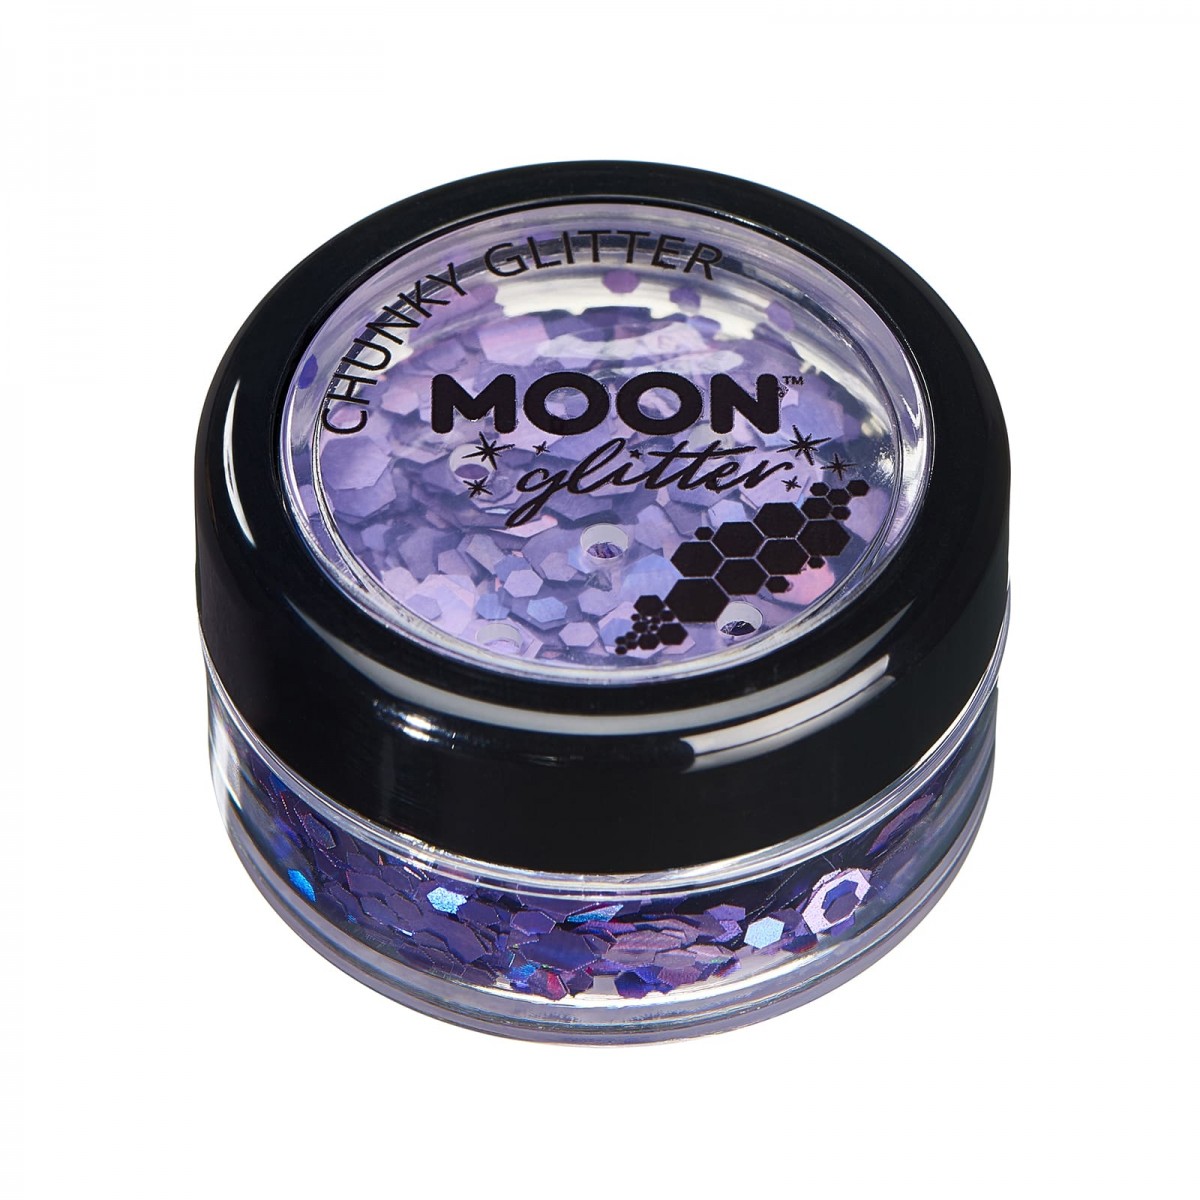 MOON CREATIONS G4 HOLOGRAPHIC CHUNKY GLITTER PURPLE 3g